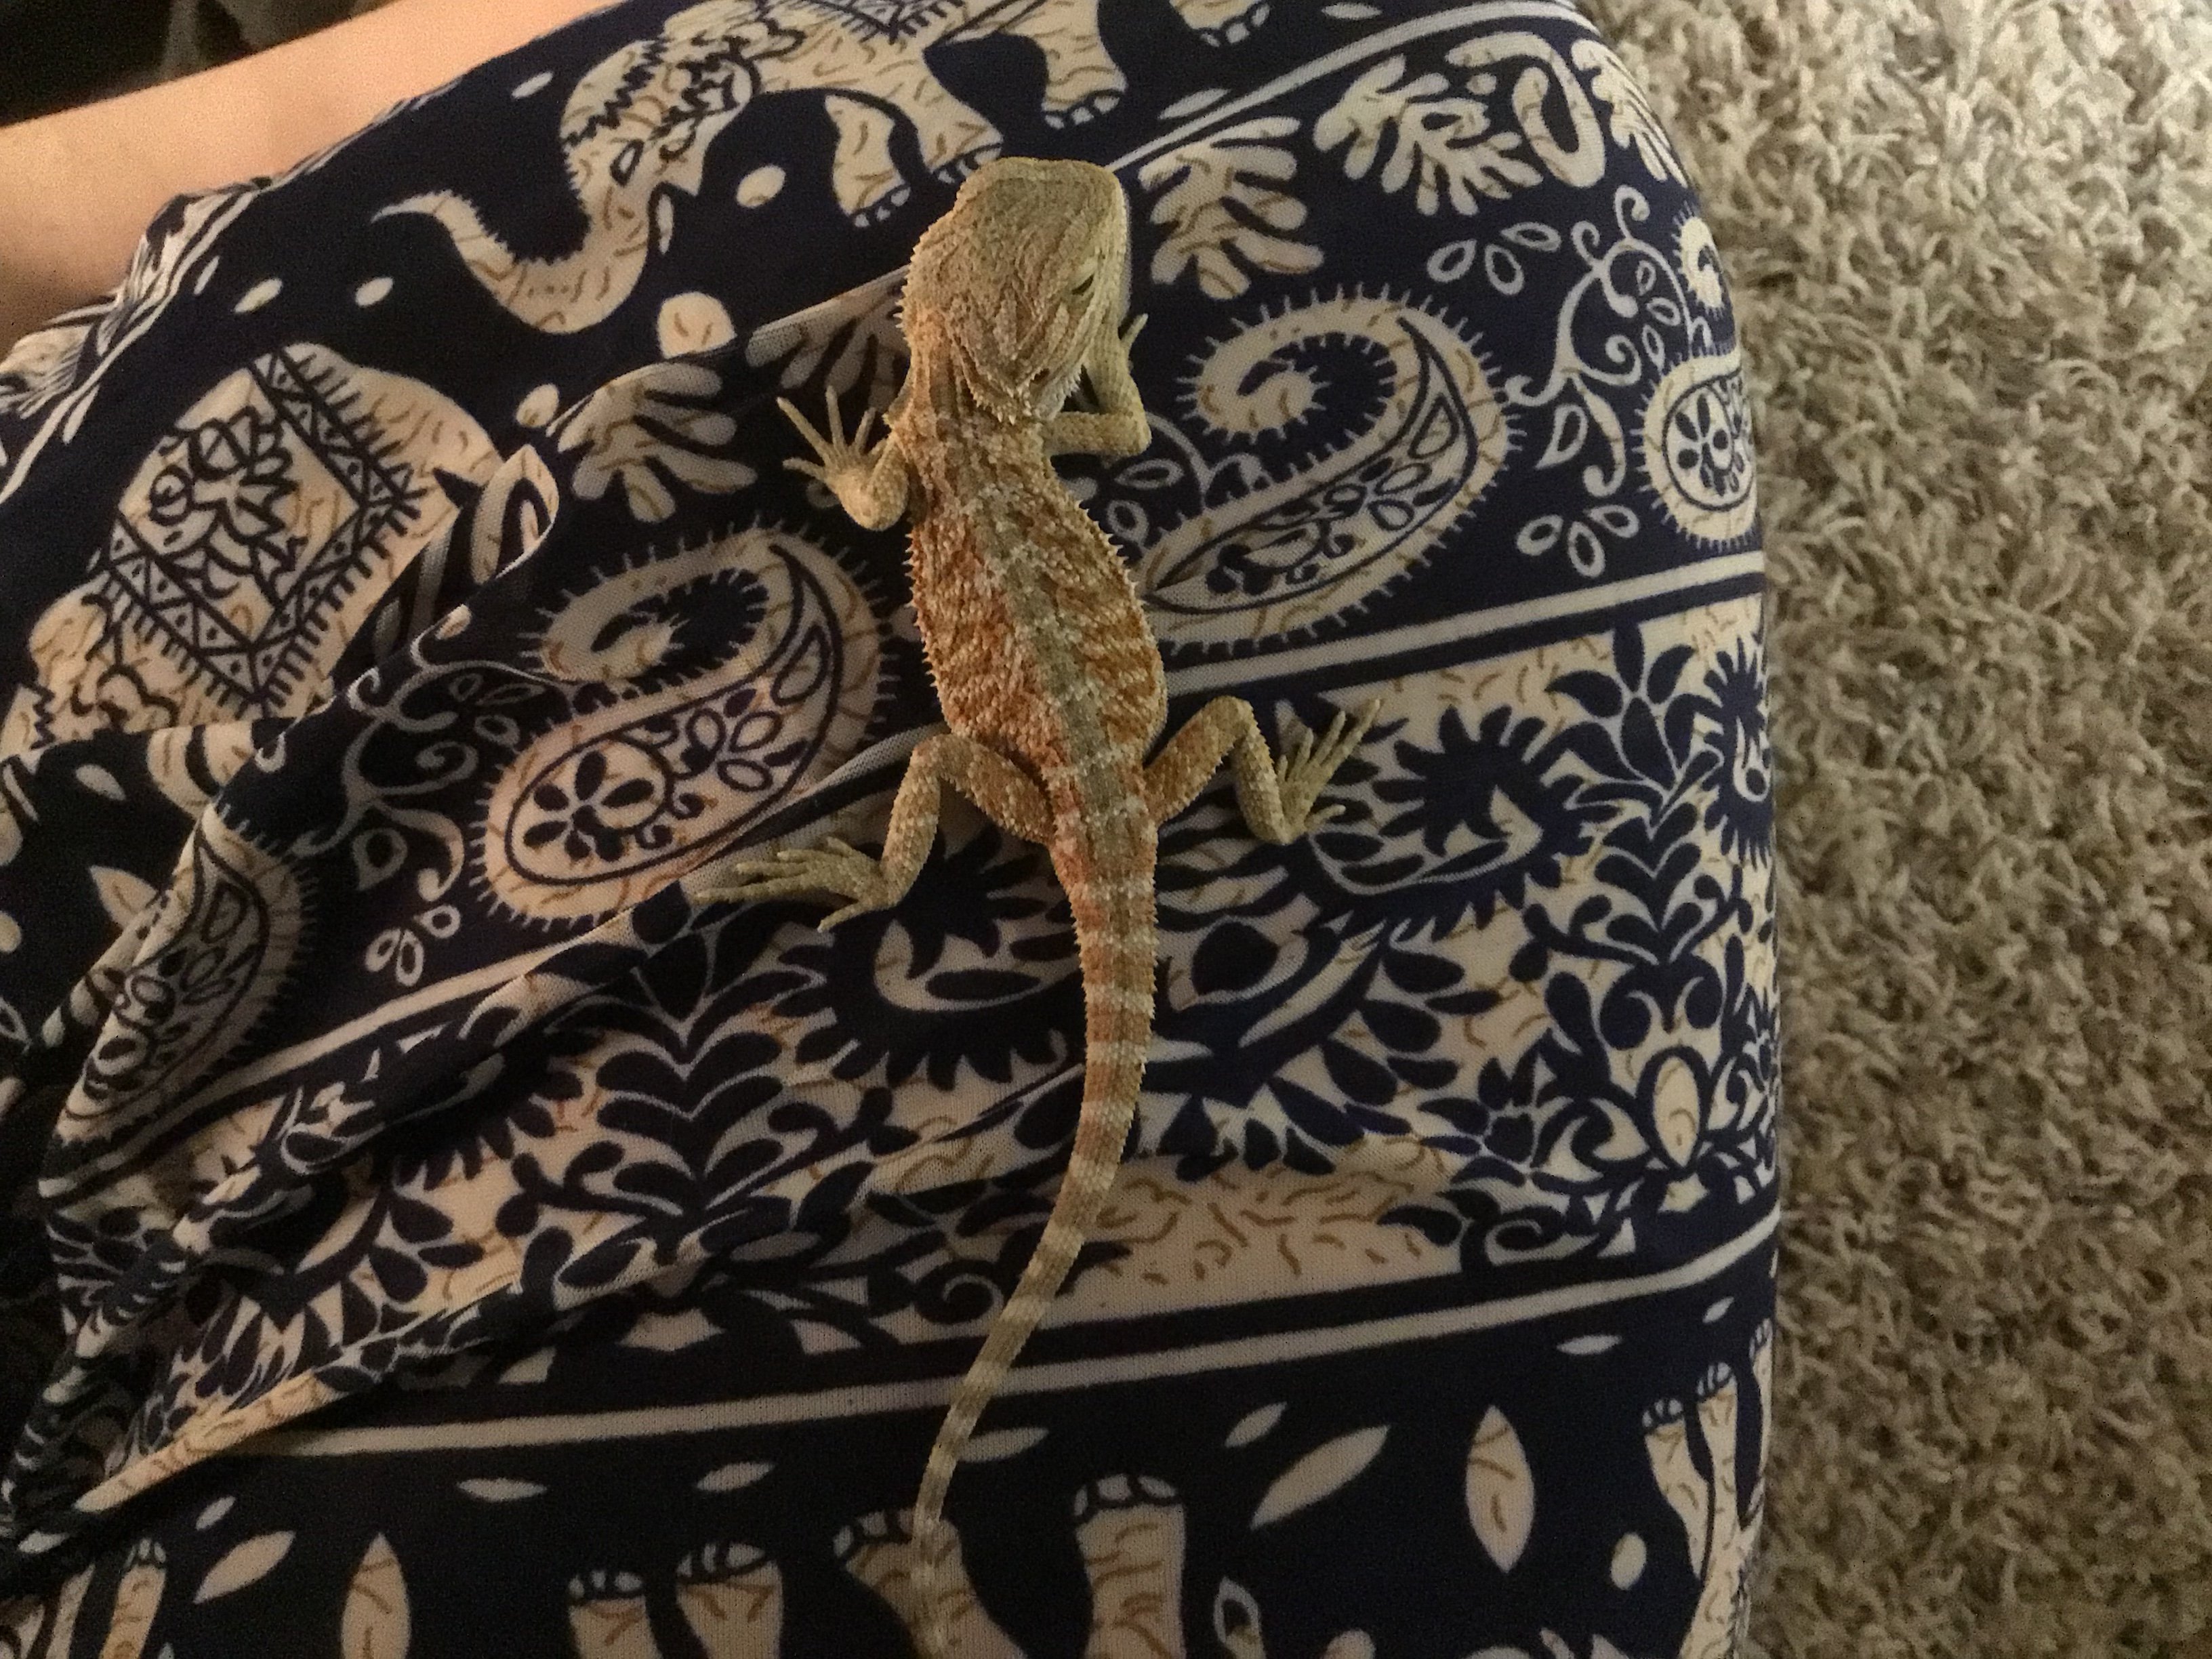 Small baby bearded dragon wont eat and he all skin and bones(what it looks like)